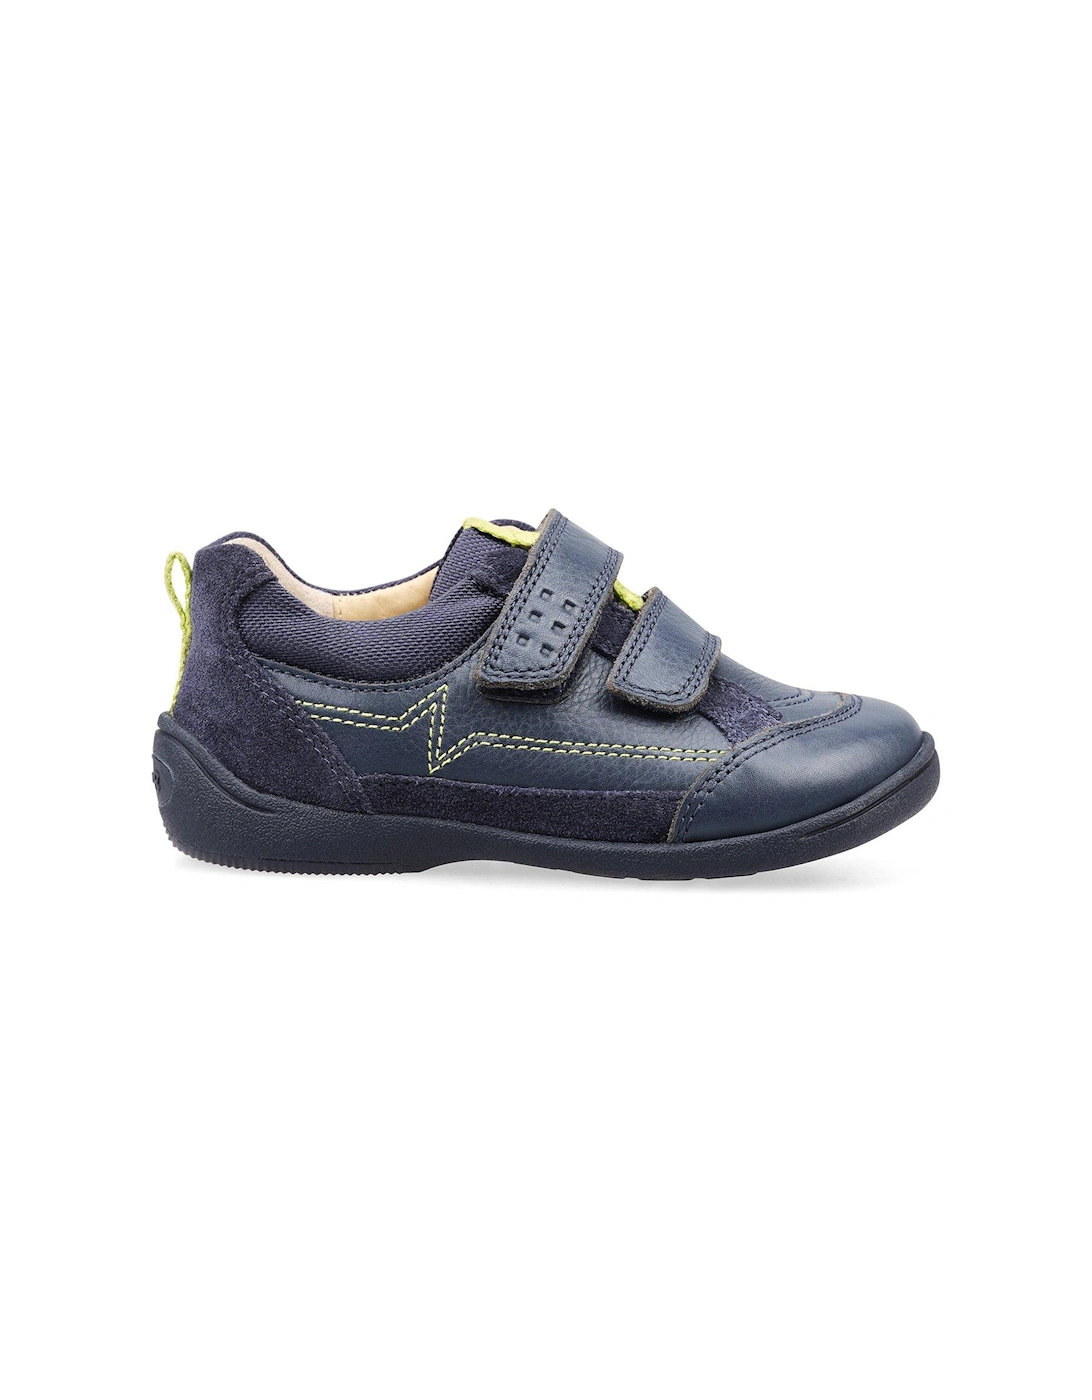 Zigzag Soft Leather Double Riptape Boys First Shoes - Navy Blue, 3 of 2